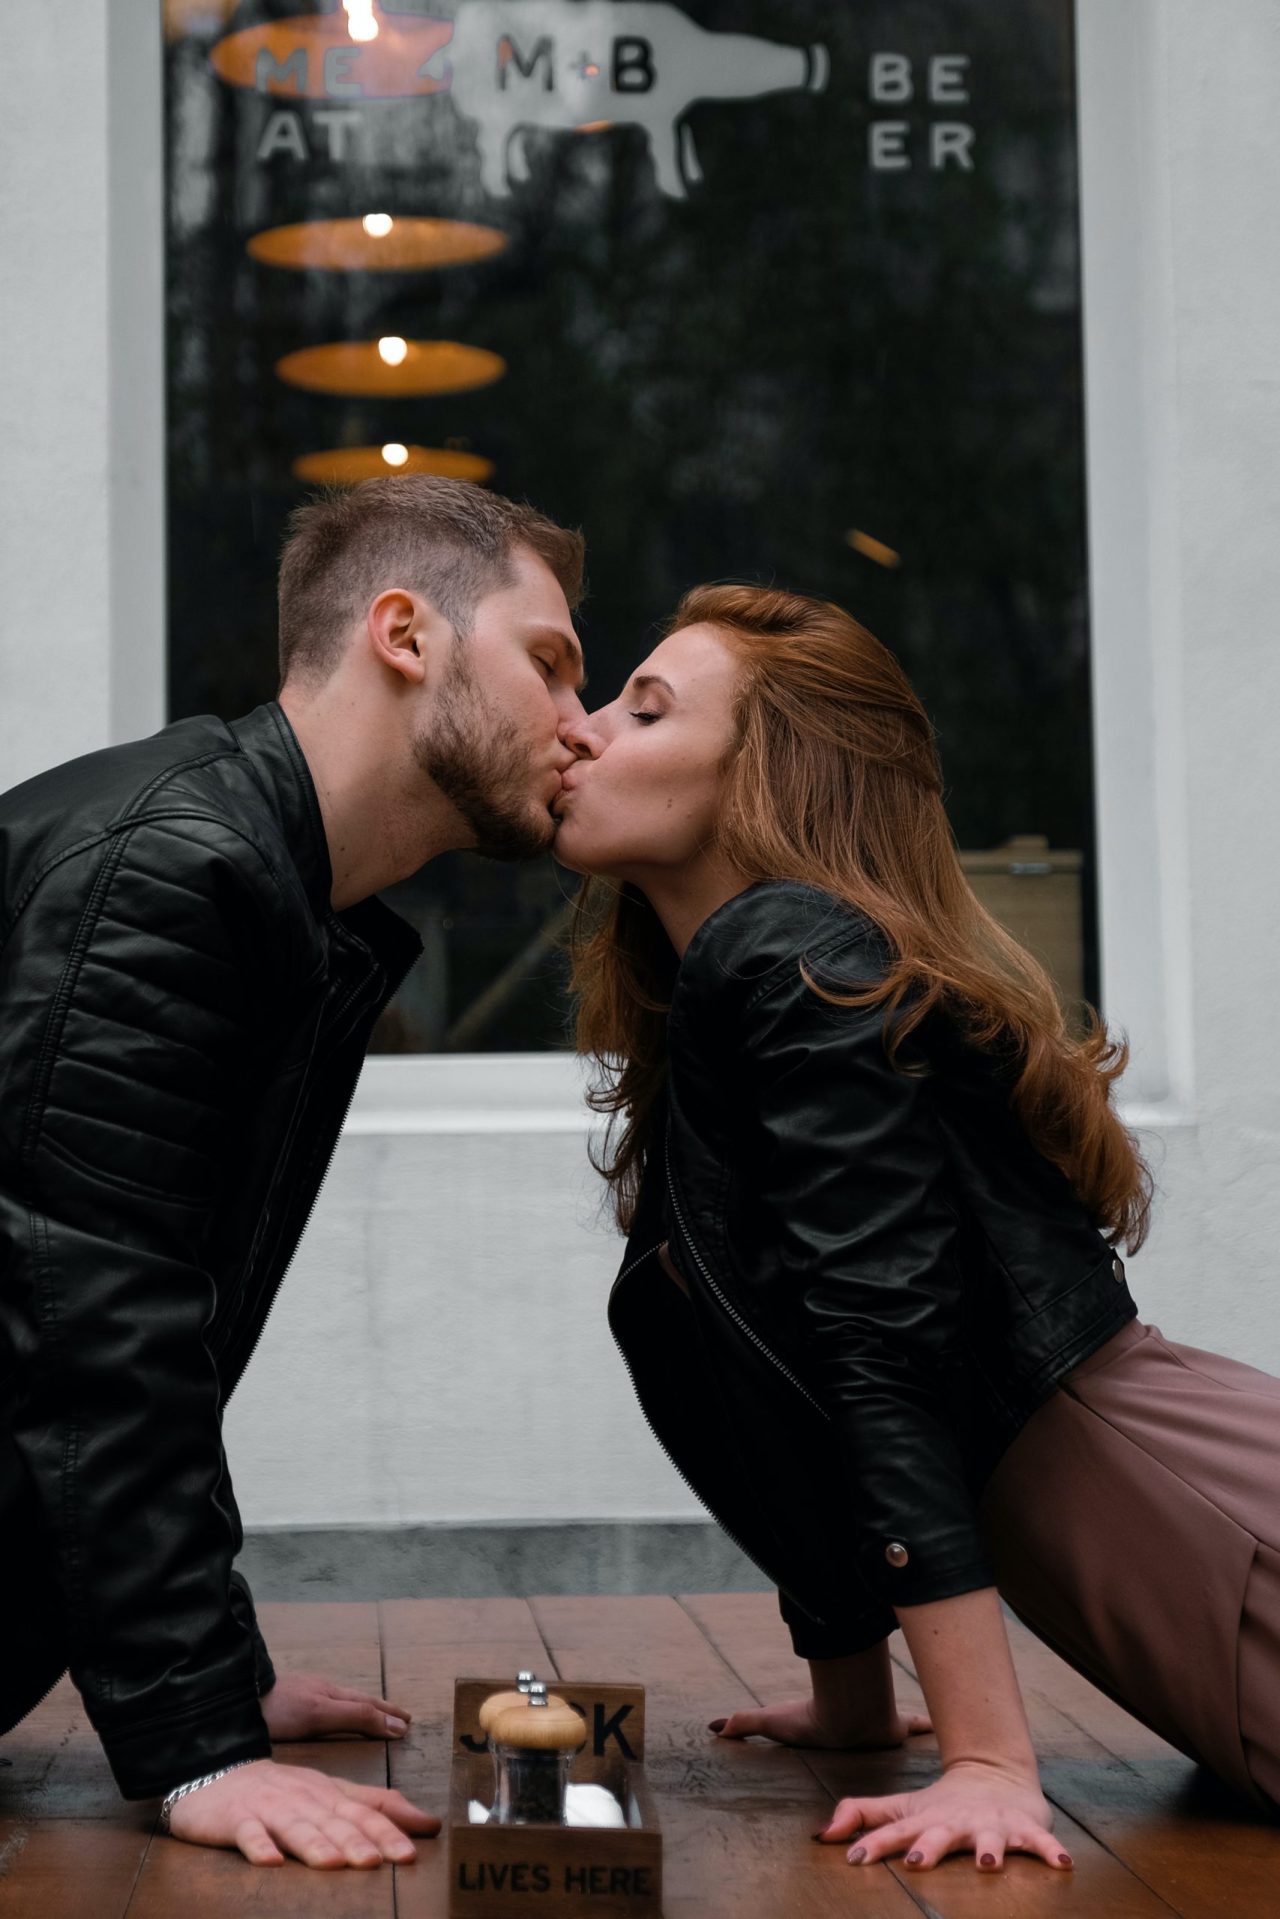 If You Don’t Have These 11 Things, Your Relationship Could Fall Apart